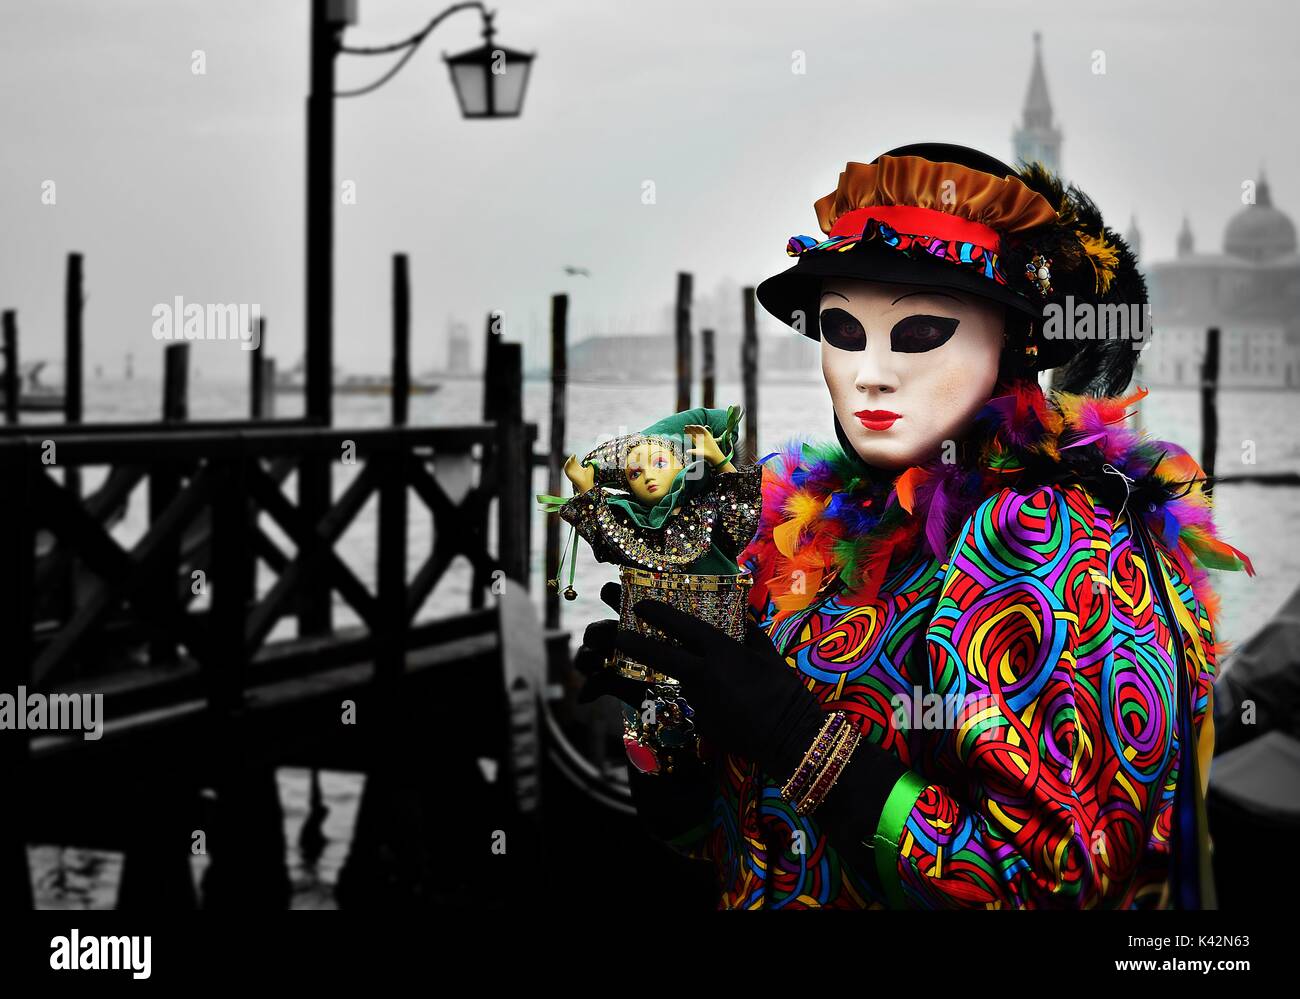 A person in a costume full of bright colours holding a small doll at the Carnival of Venice Stock Photo